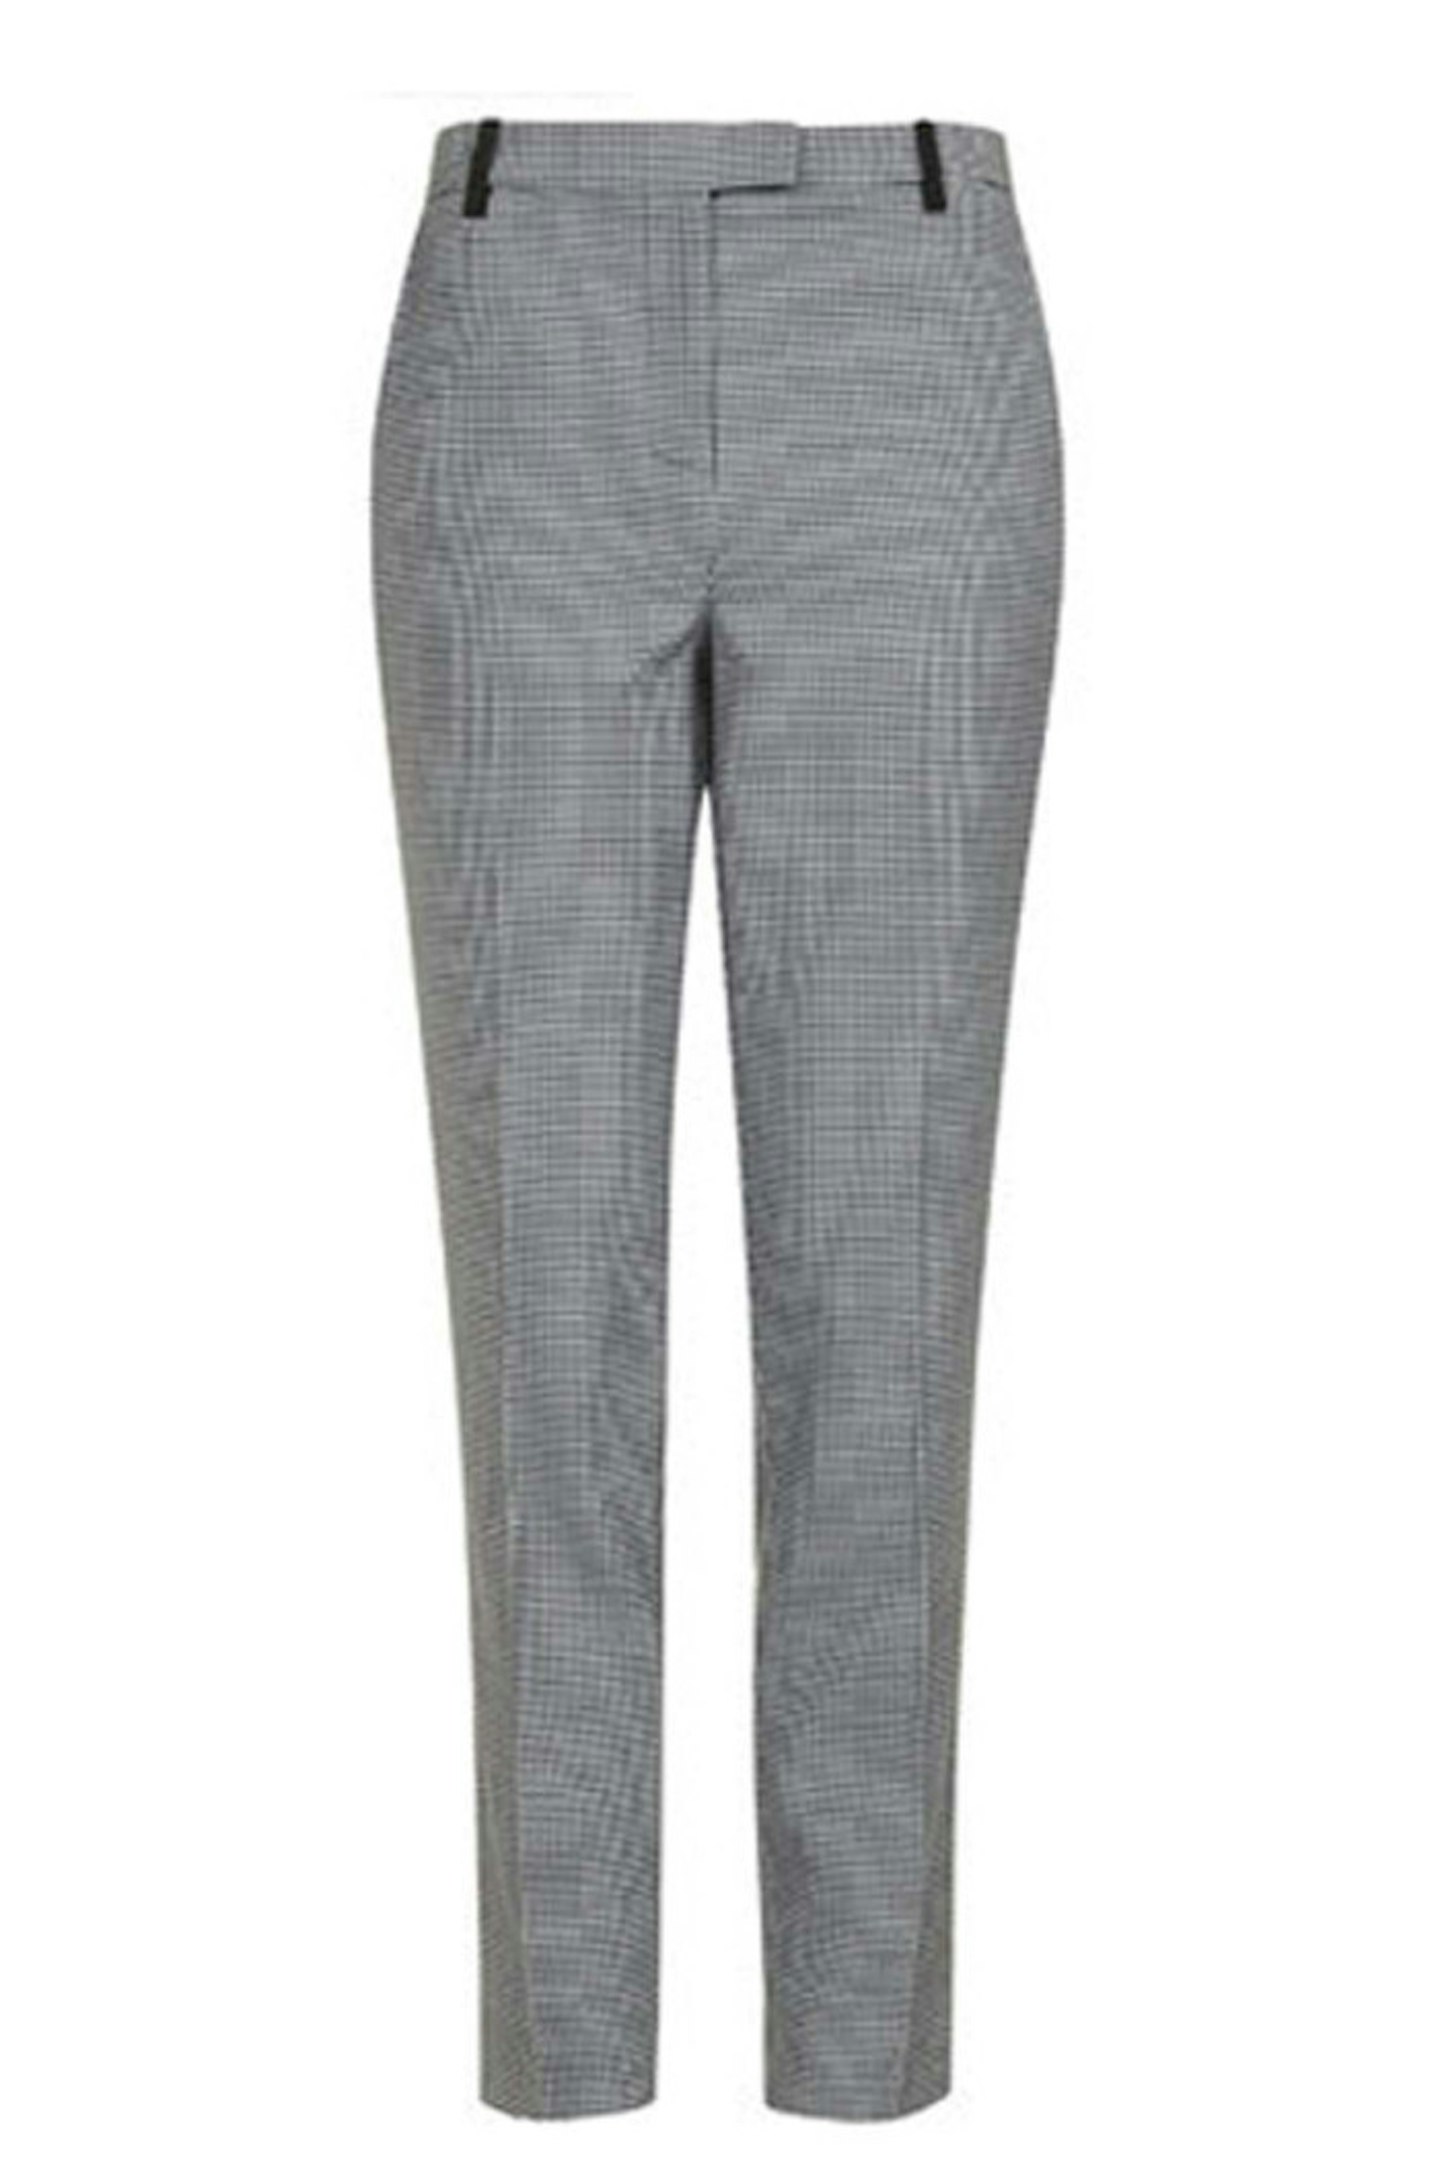 43. Dogtooth cigarette trousers, £42, Topshop